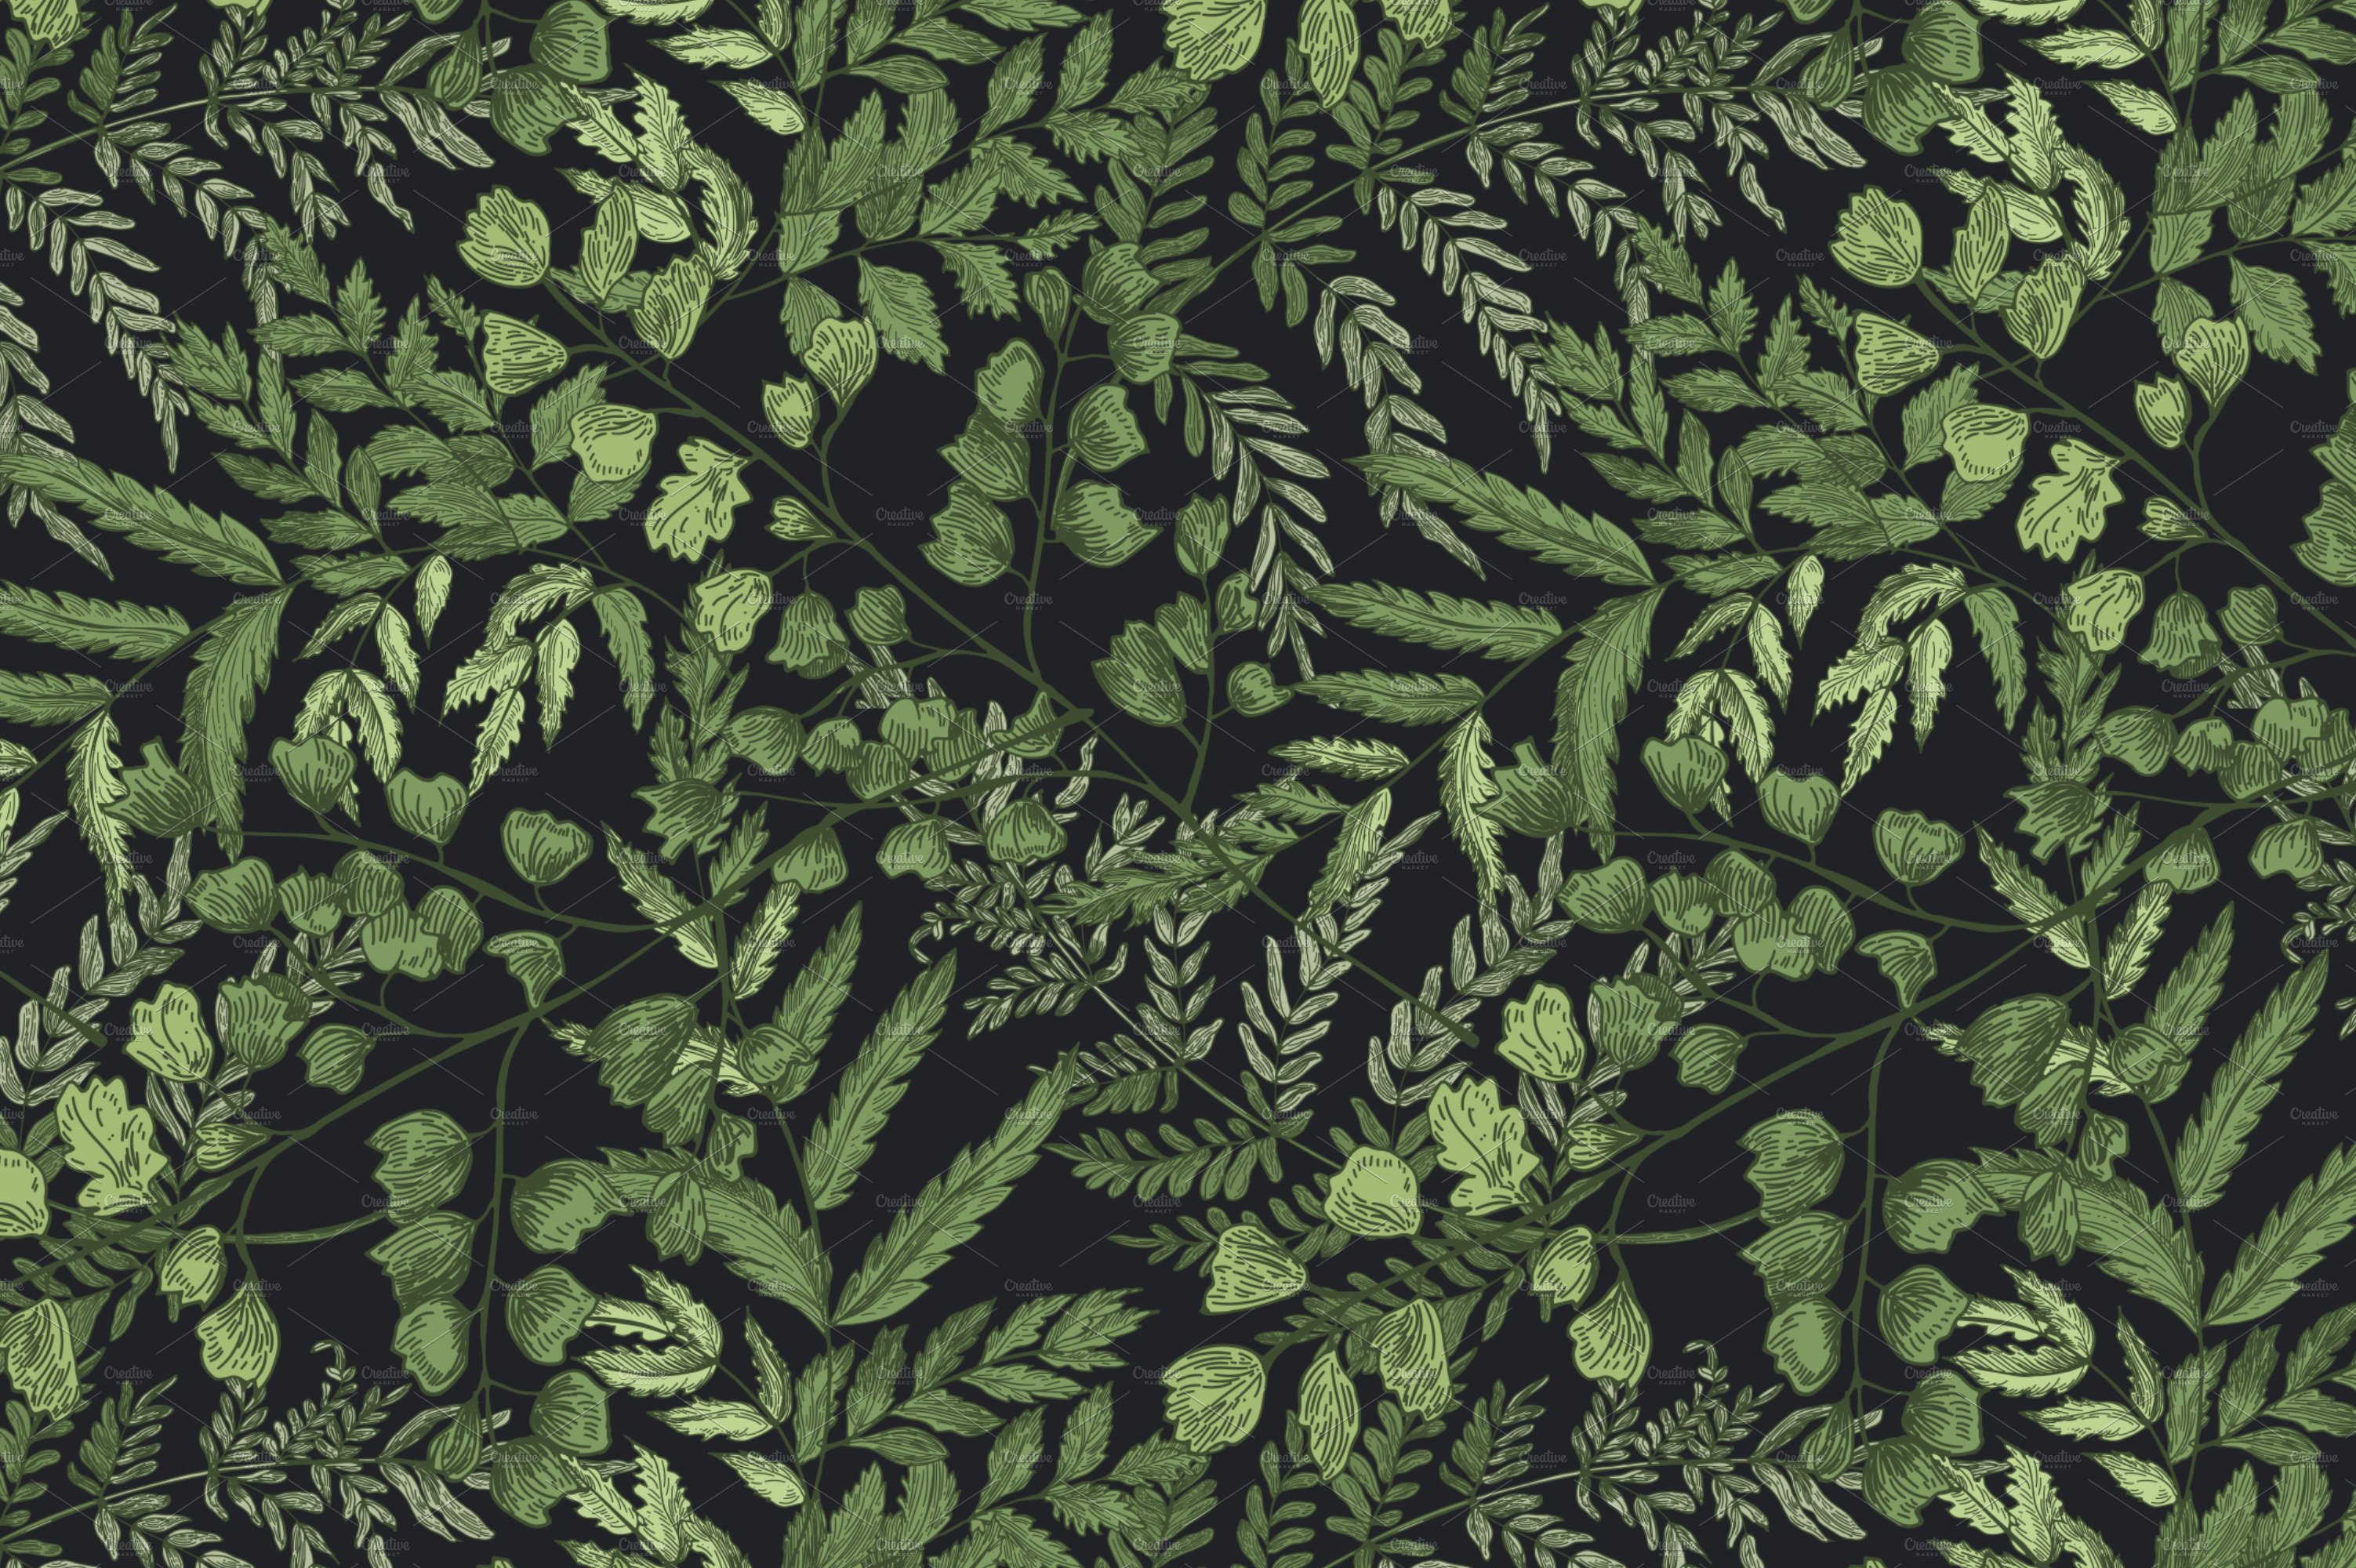 Black background with green leaves and plants.